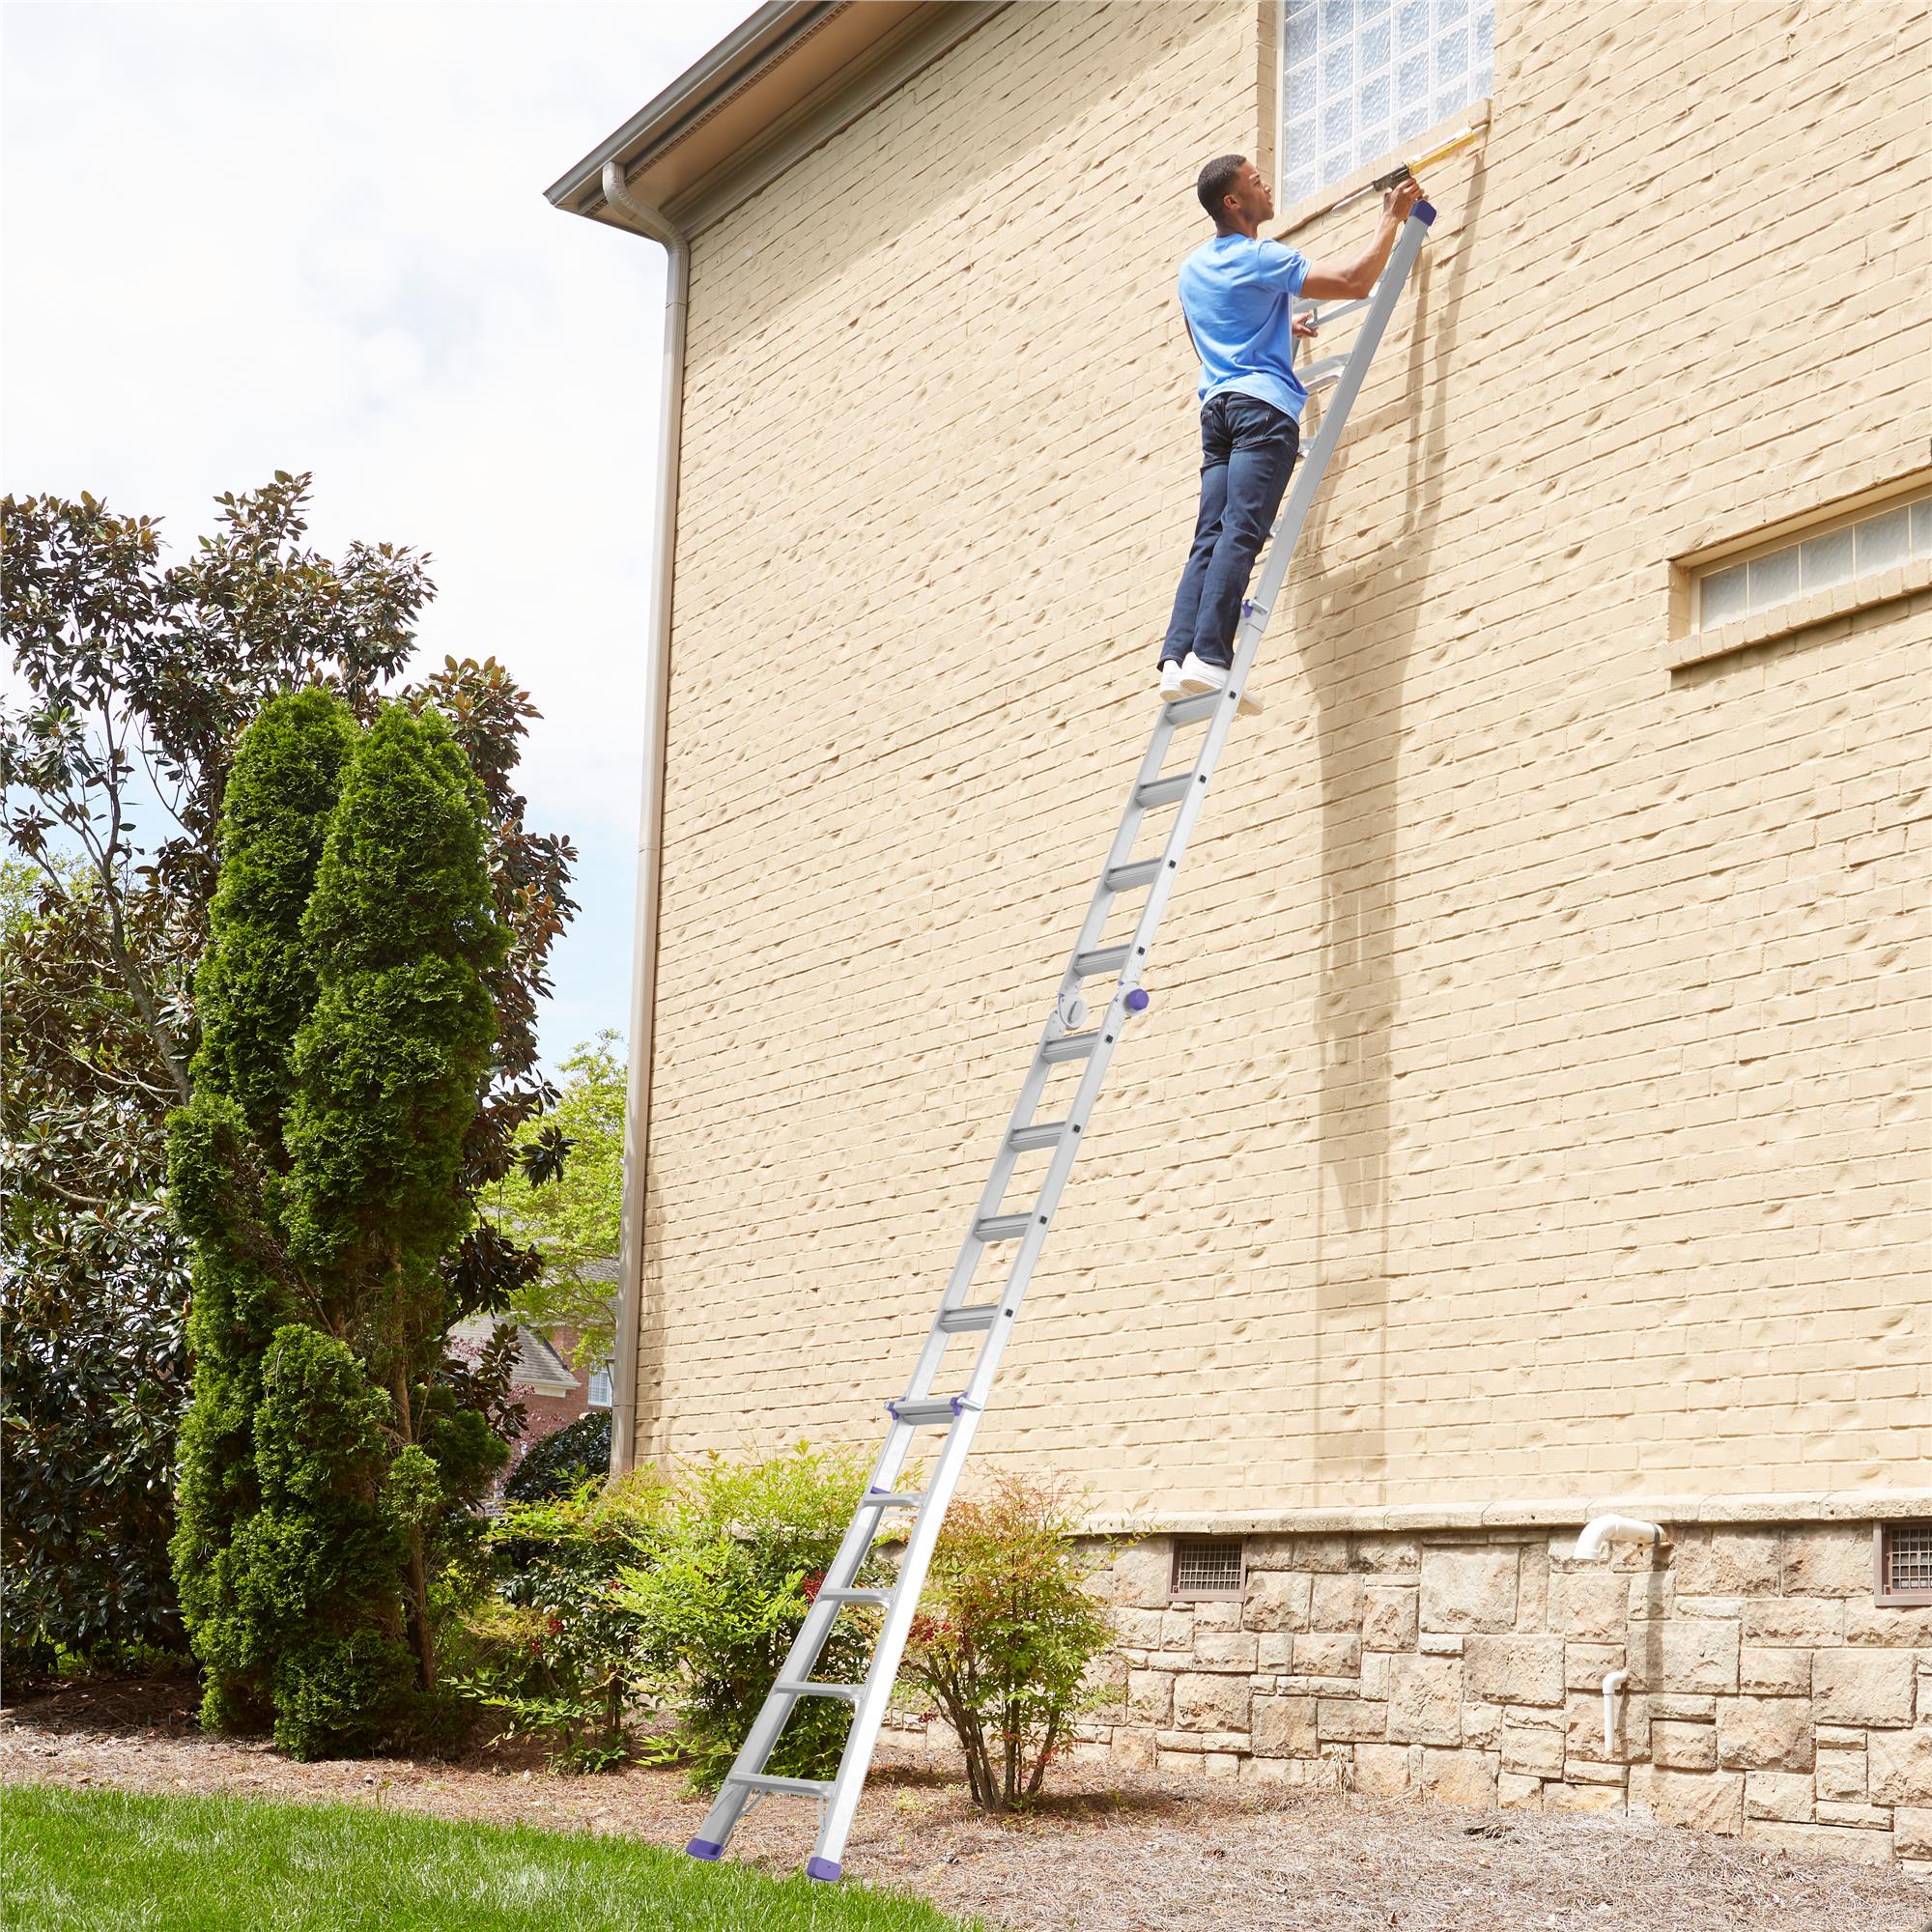 22 Ft. Height Multi-Position Ladder - Cosco